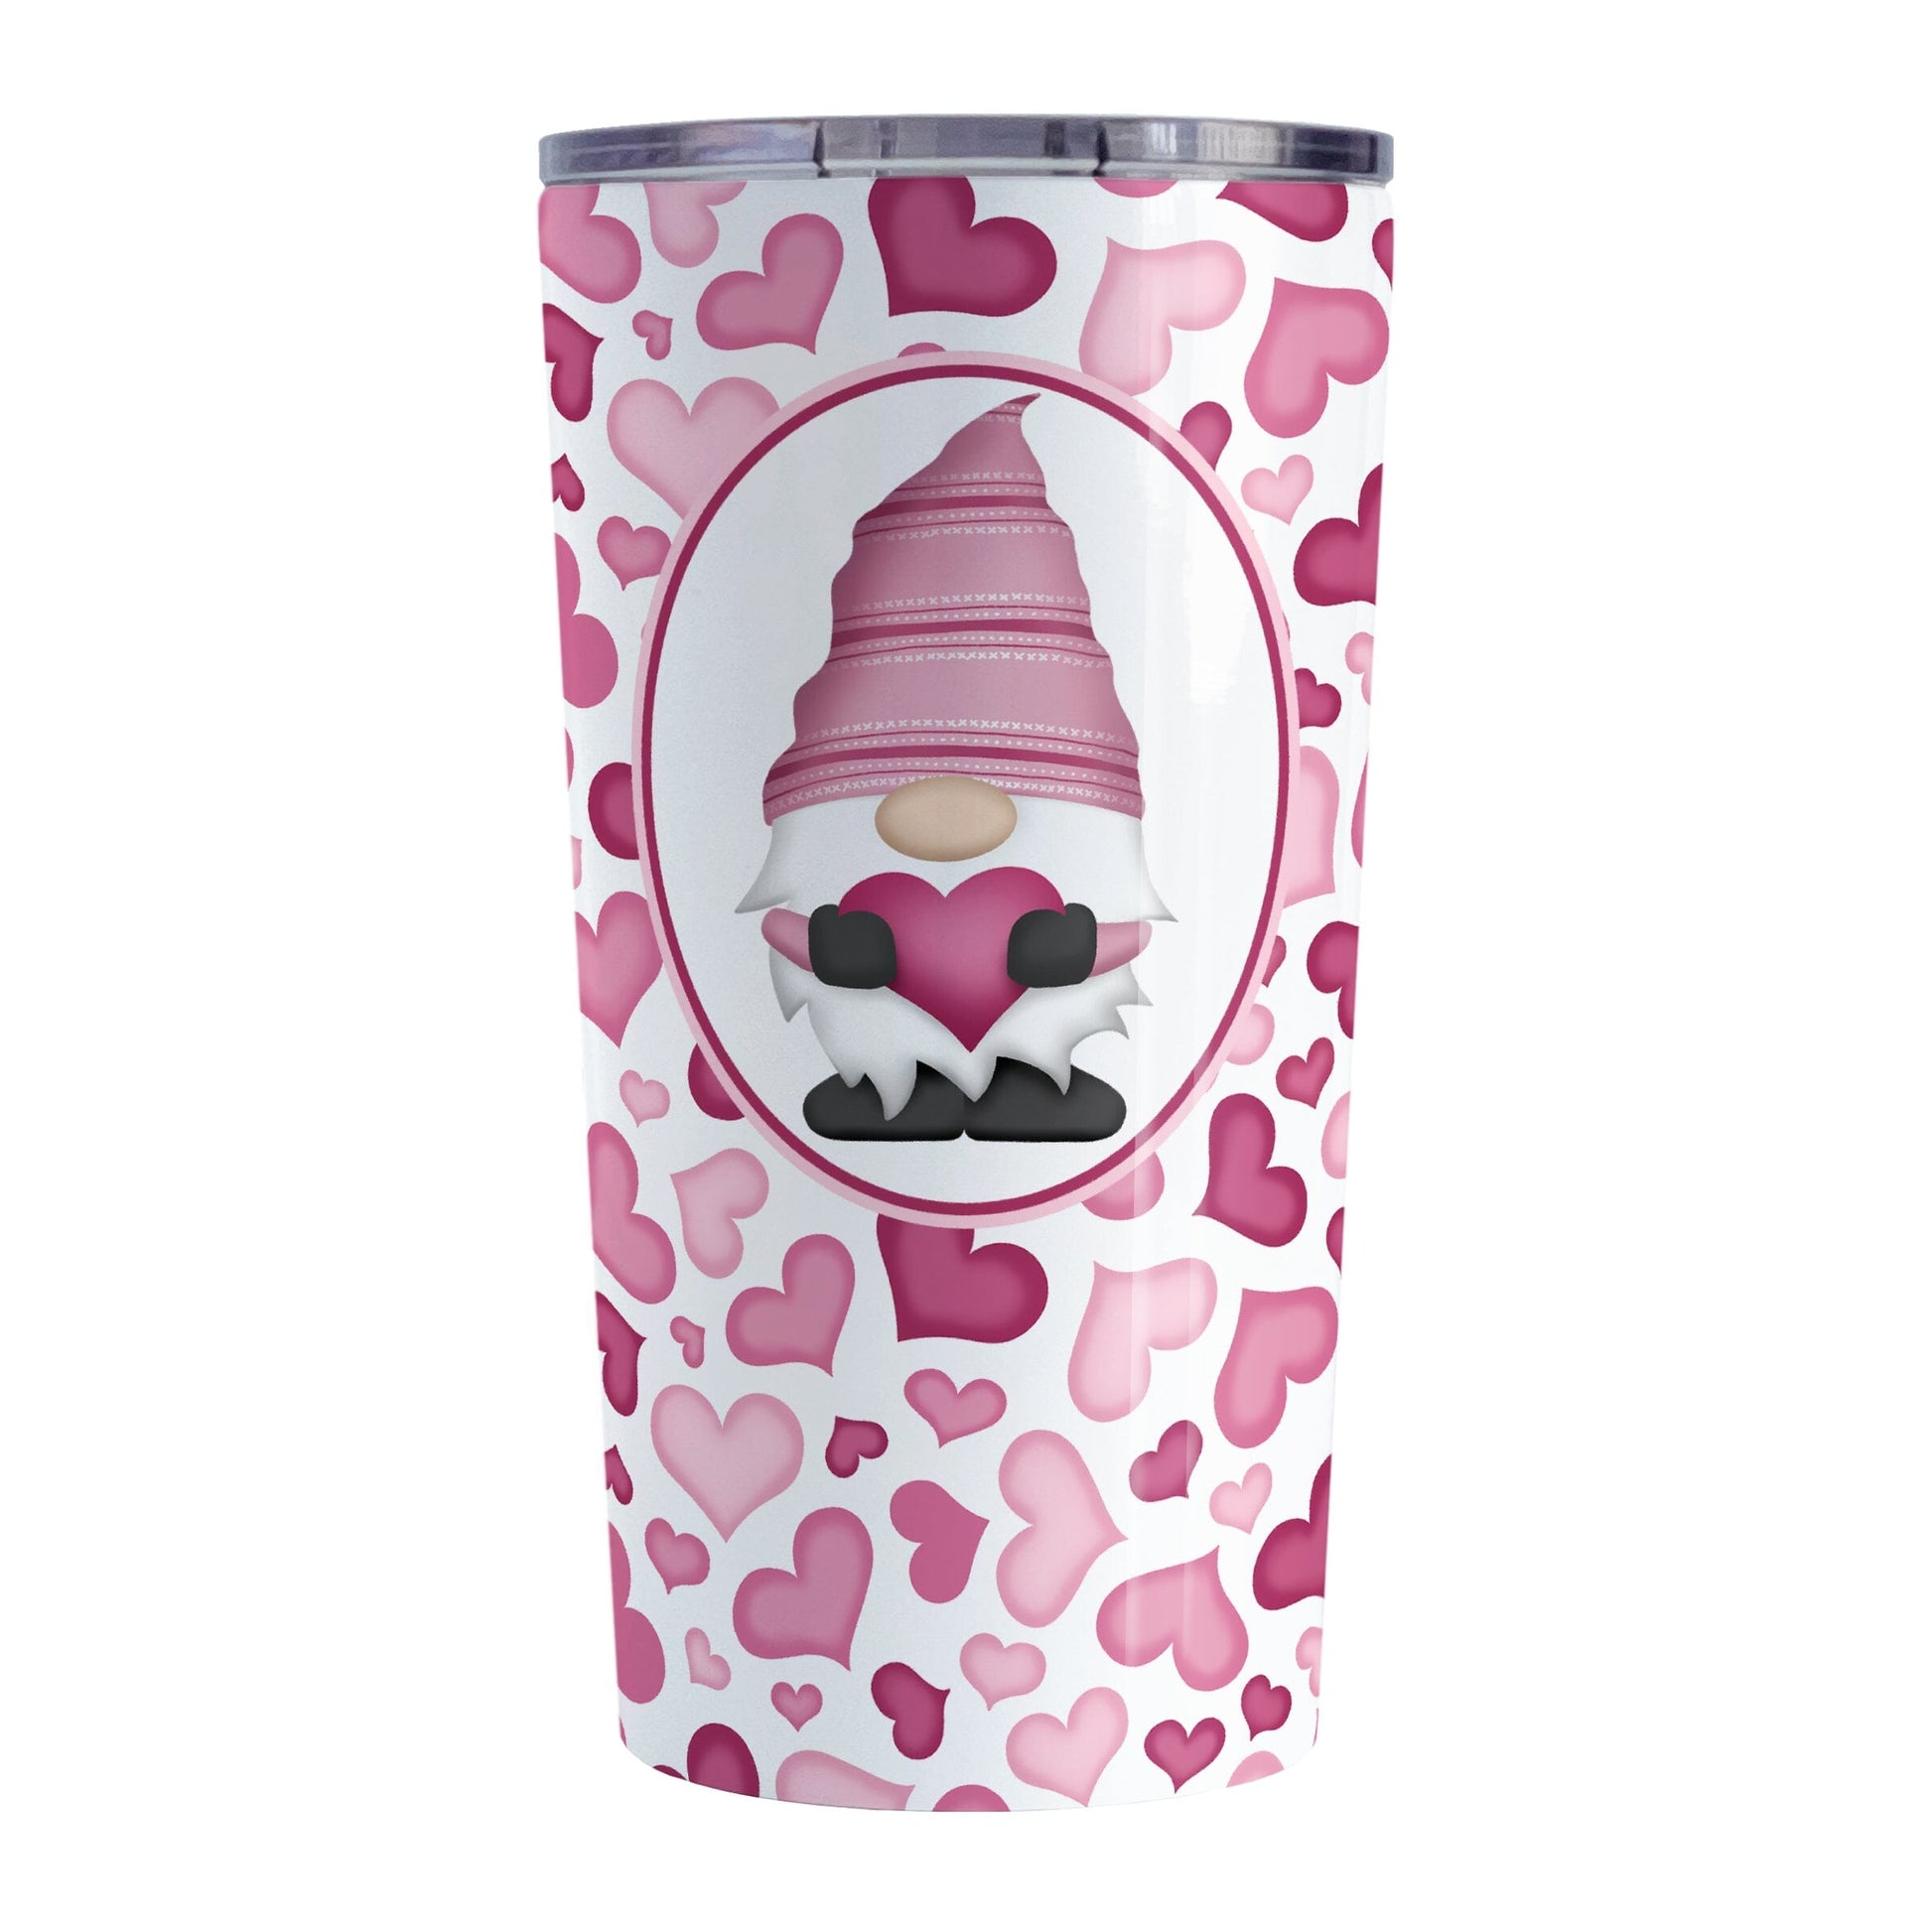 Pink Gnome Hearts Tumbler Cup (20oz) at Amy's Coffee Mugs. A stainless steel tumbler cup designed with an adorable pink gnome holding a heart in a white oval over a pattern of cute hearts in different shades of pink that wrap around the cup.